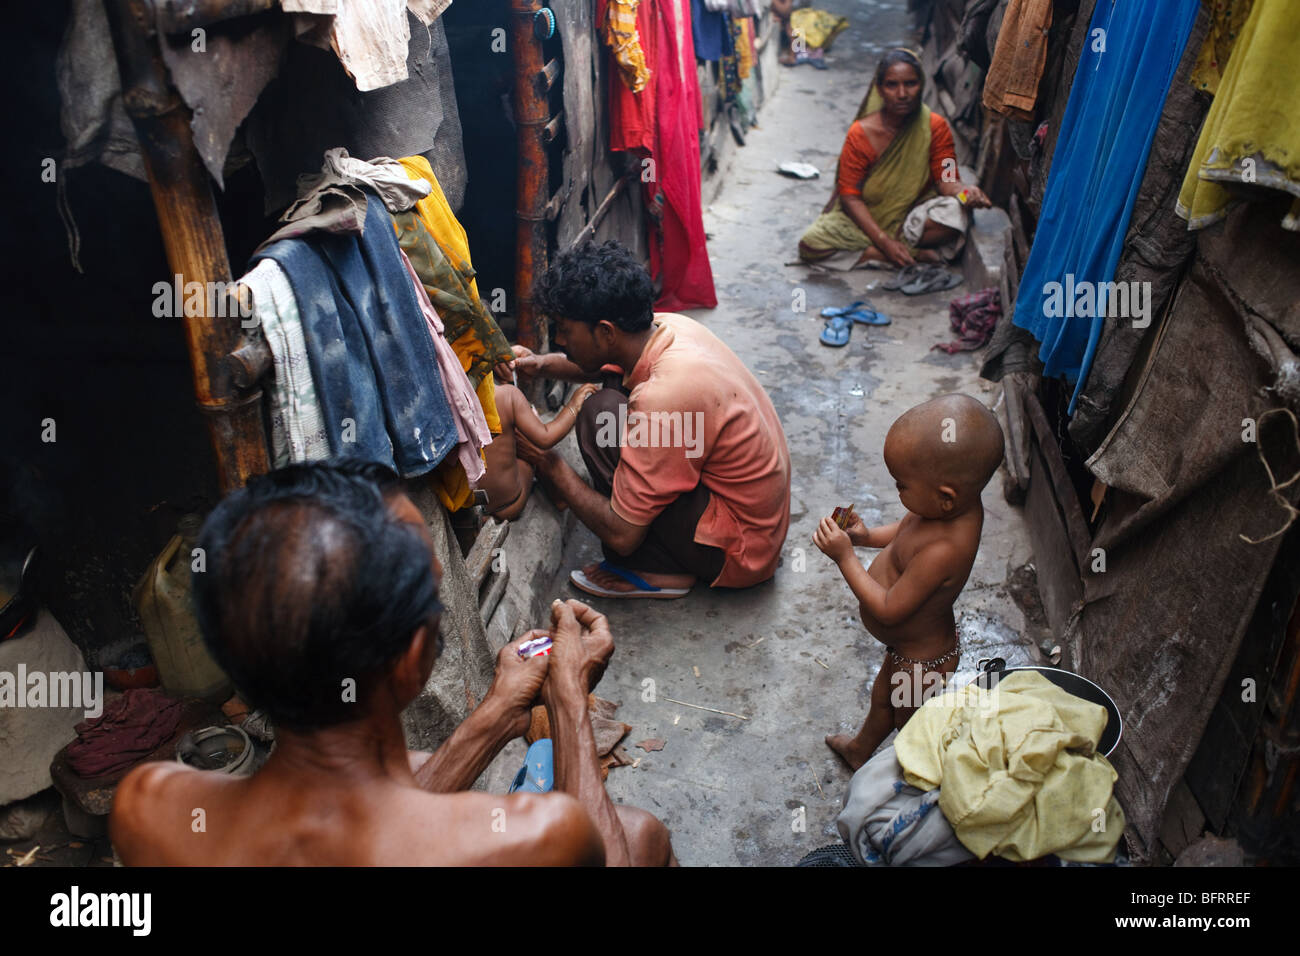 A scene from a daily life of a family living in one of the slums in Kolkata, India Stock Photo